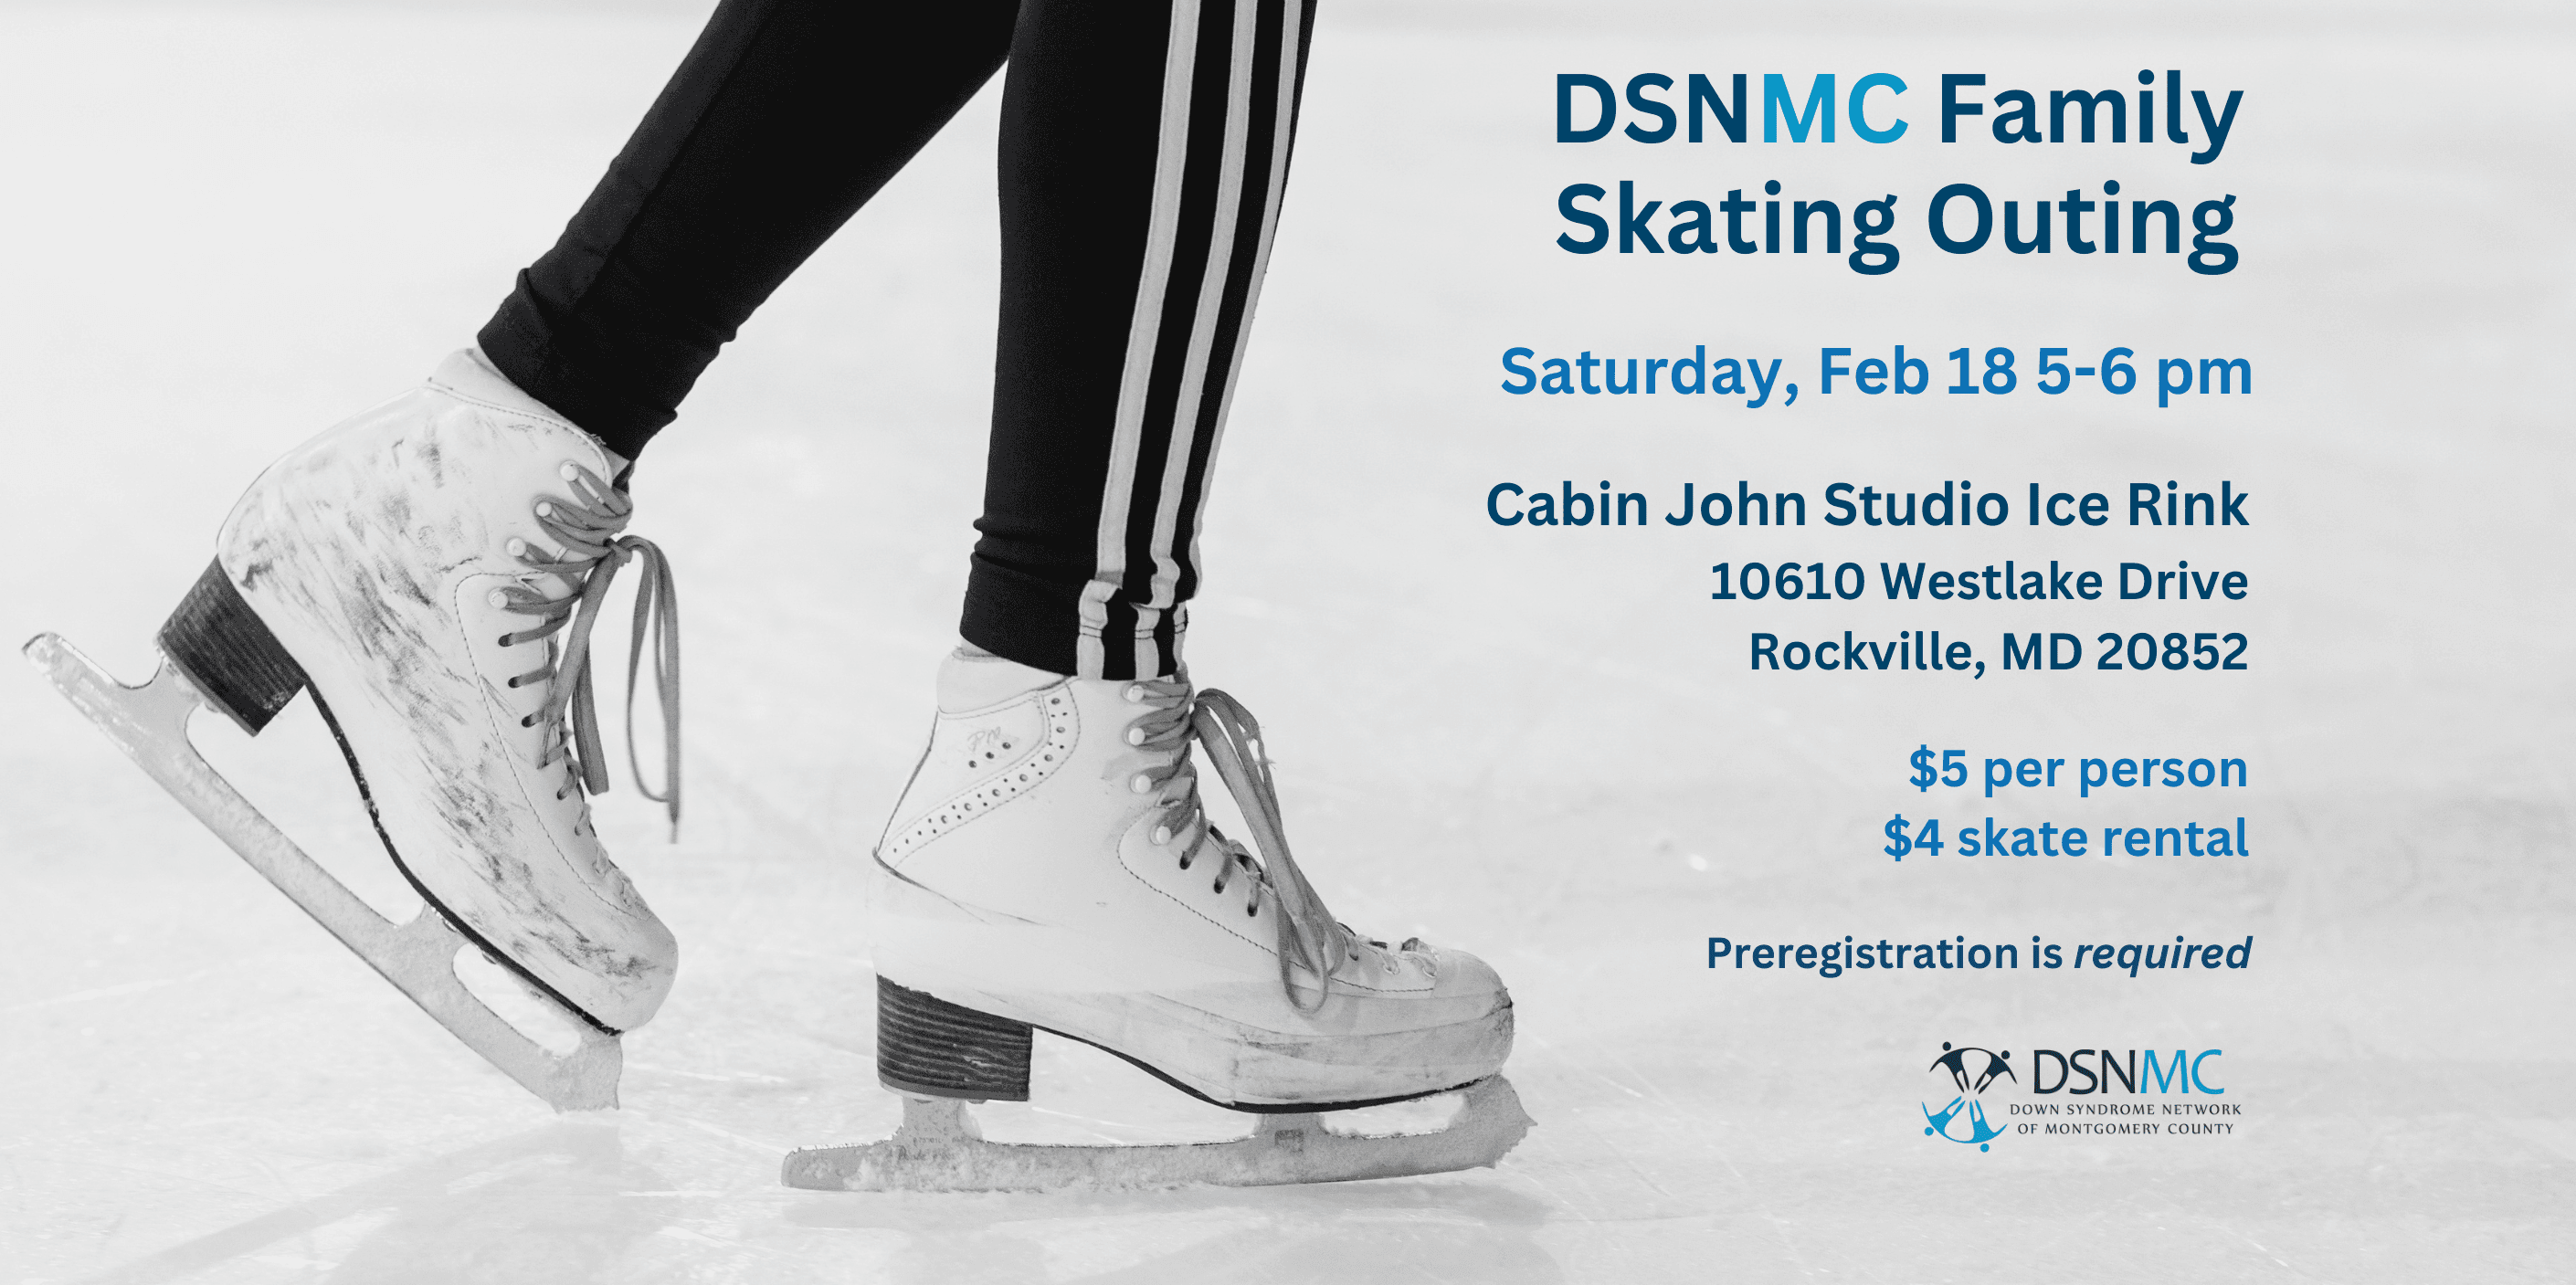 Come skate with us!